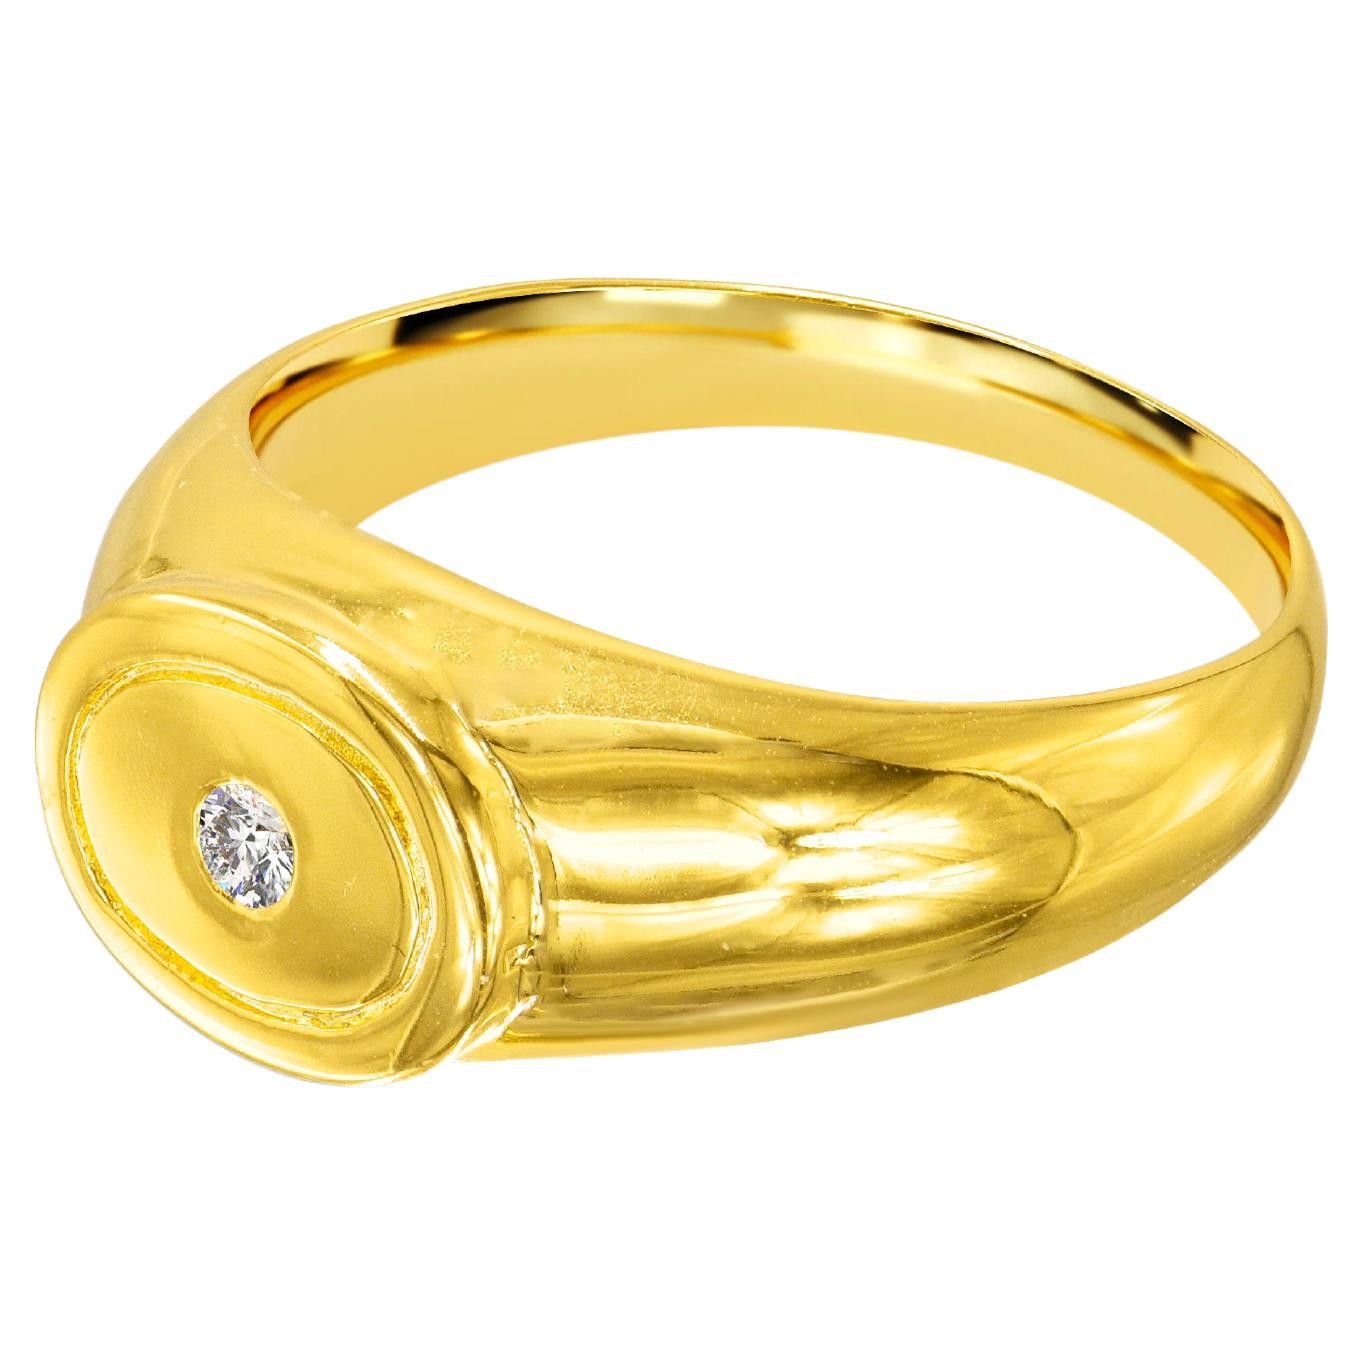 For Sale:  18K Gold filled Signet ring with 0.04 Carat Natural Diamond